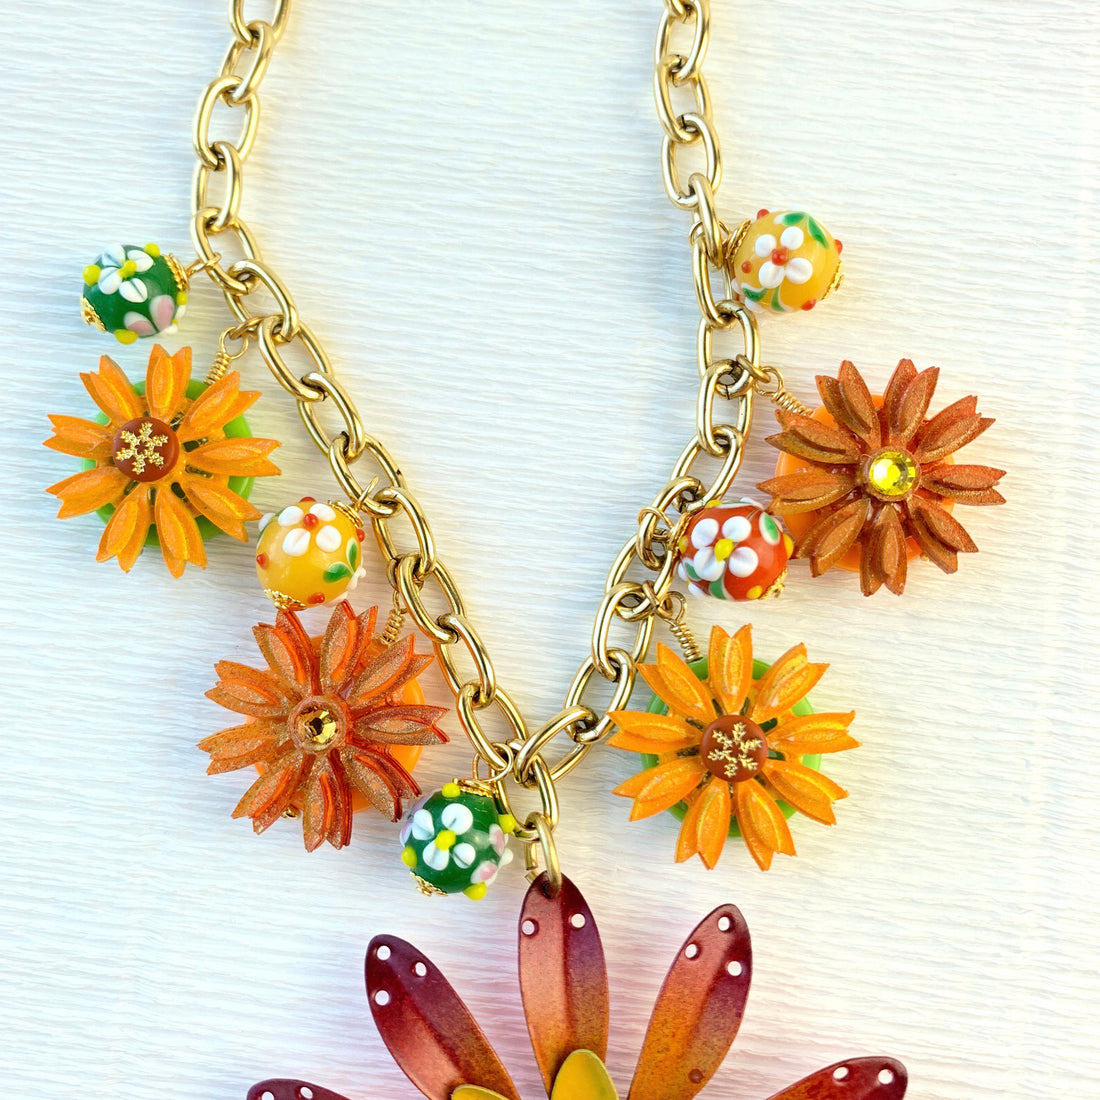 Lenora Dame Sunset Fall Bouquet Charm Necklace